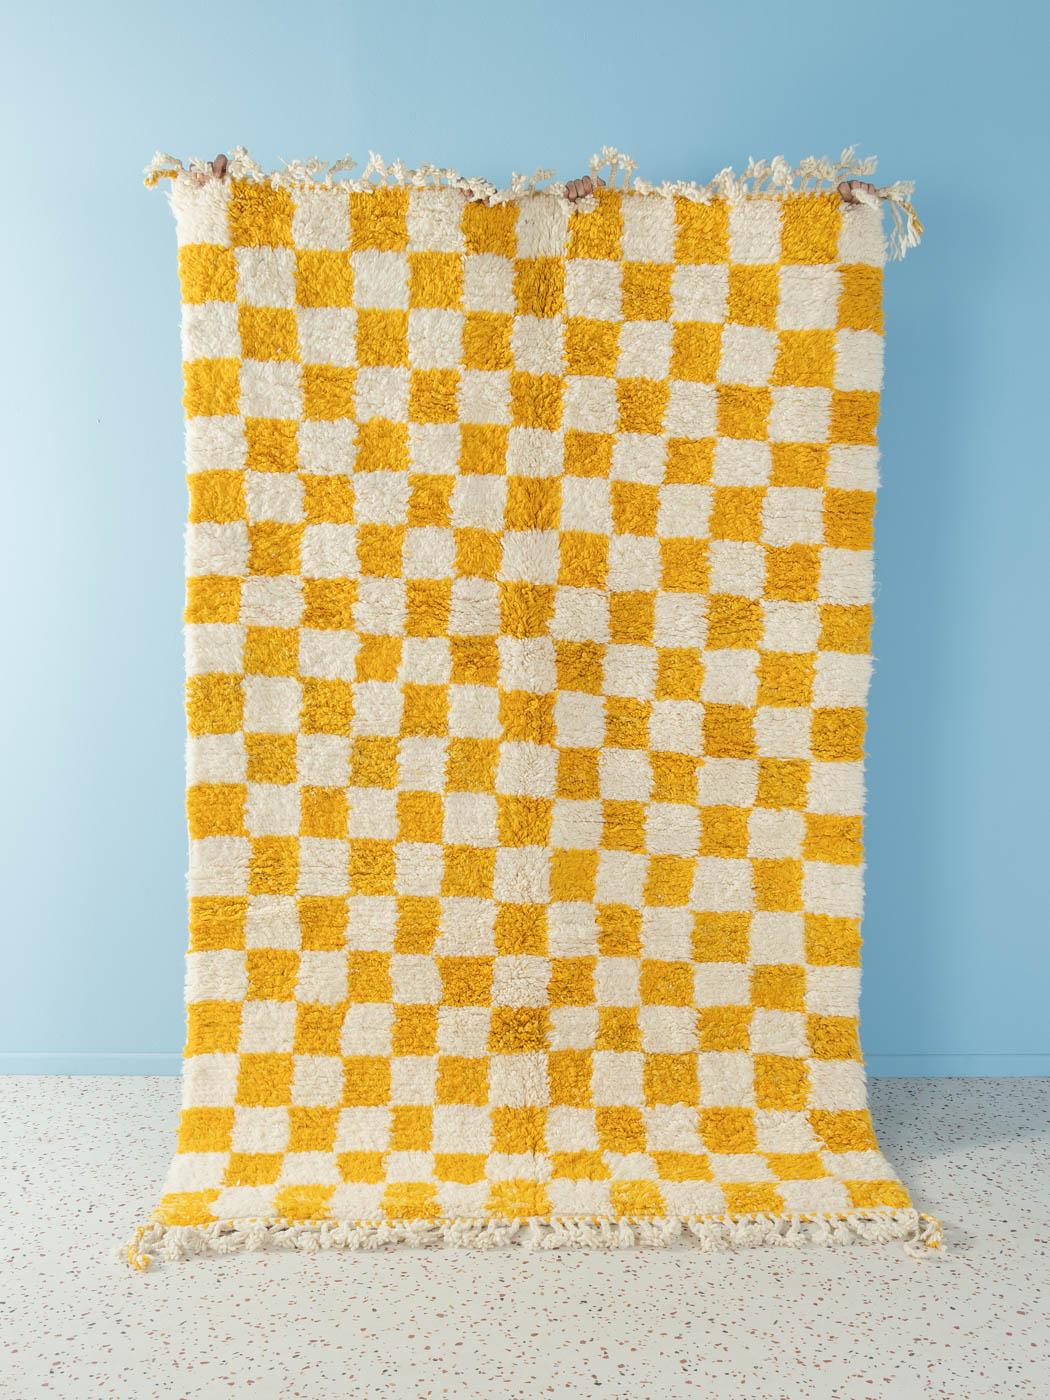 Lemon Check II is a contemporary 100% wool rug – thick and soft, comfortable underfoot. Our Berber rugs are handwoven and handknotted by Amazigh women in the Atlas Mountains. These communities have been crafting rugs for thousands of years. One knot